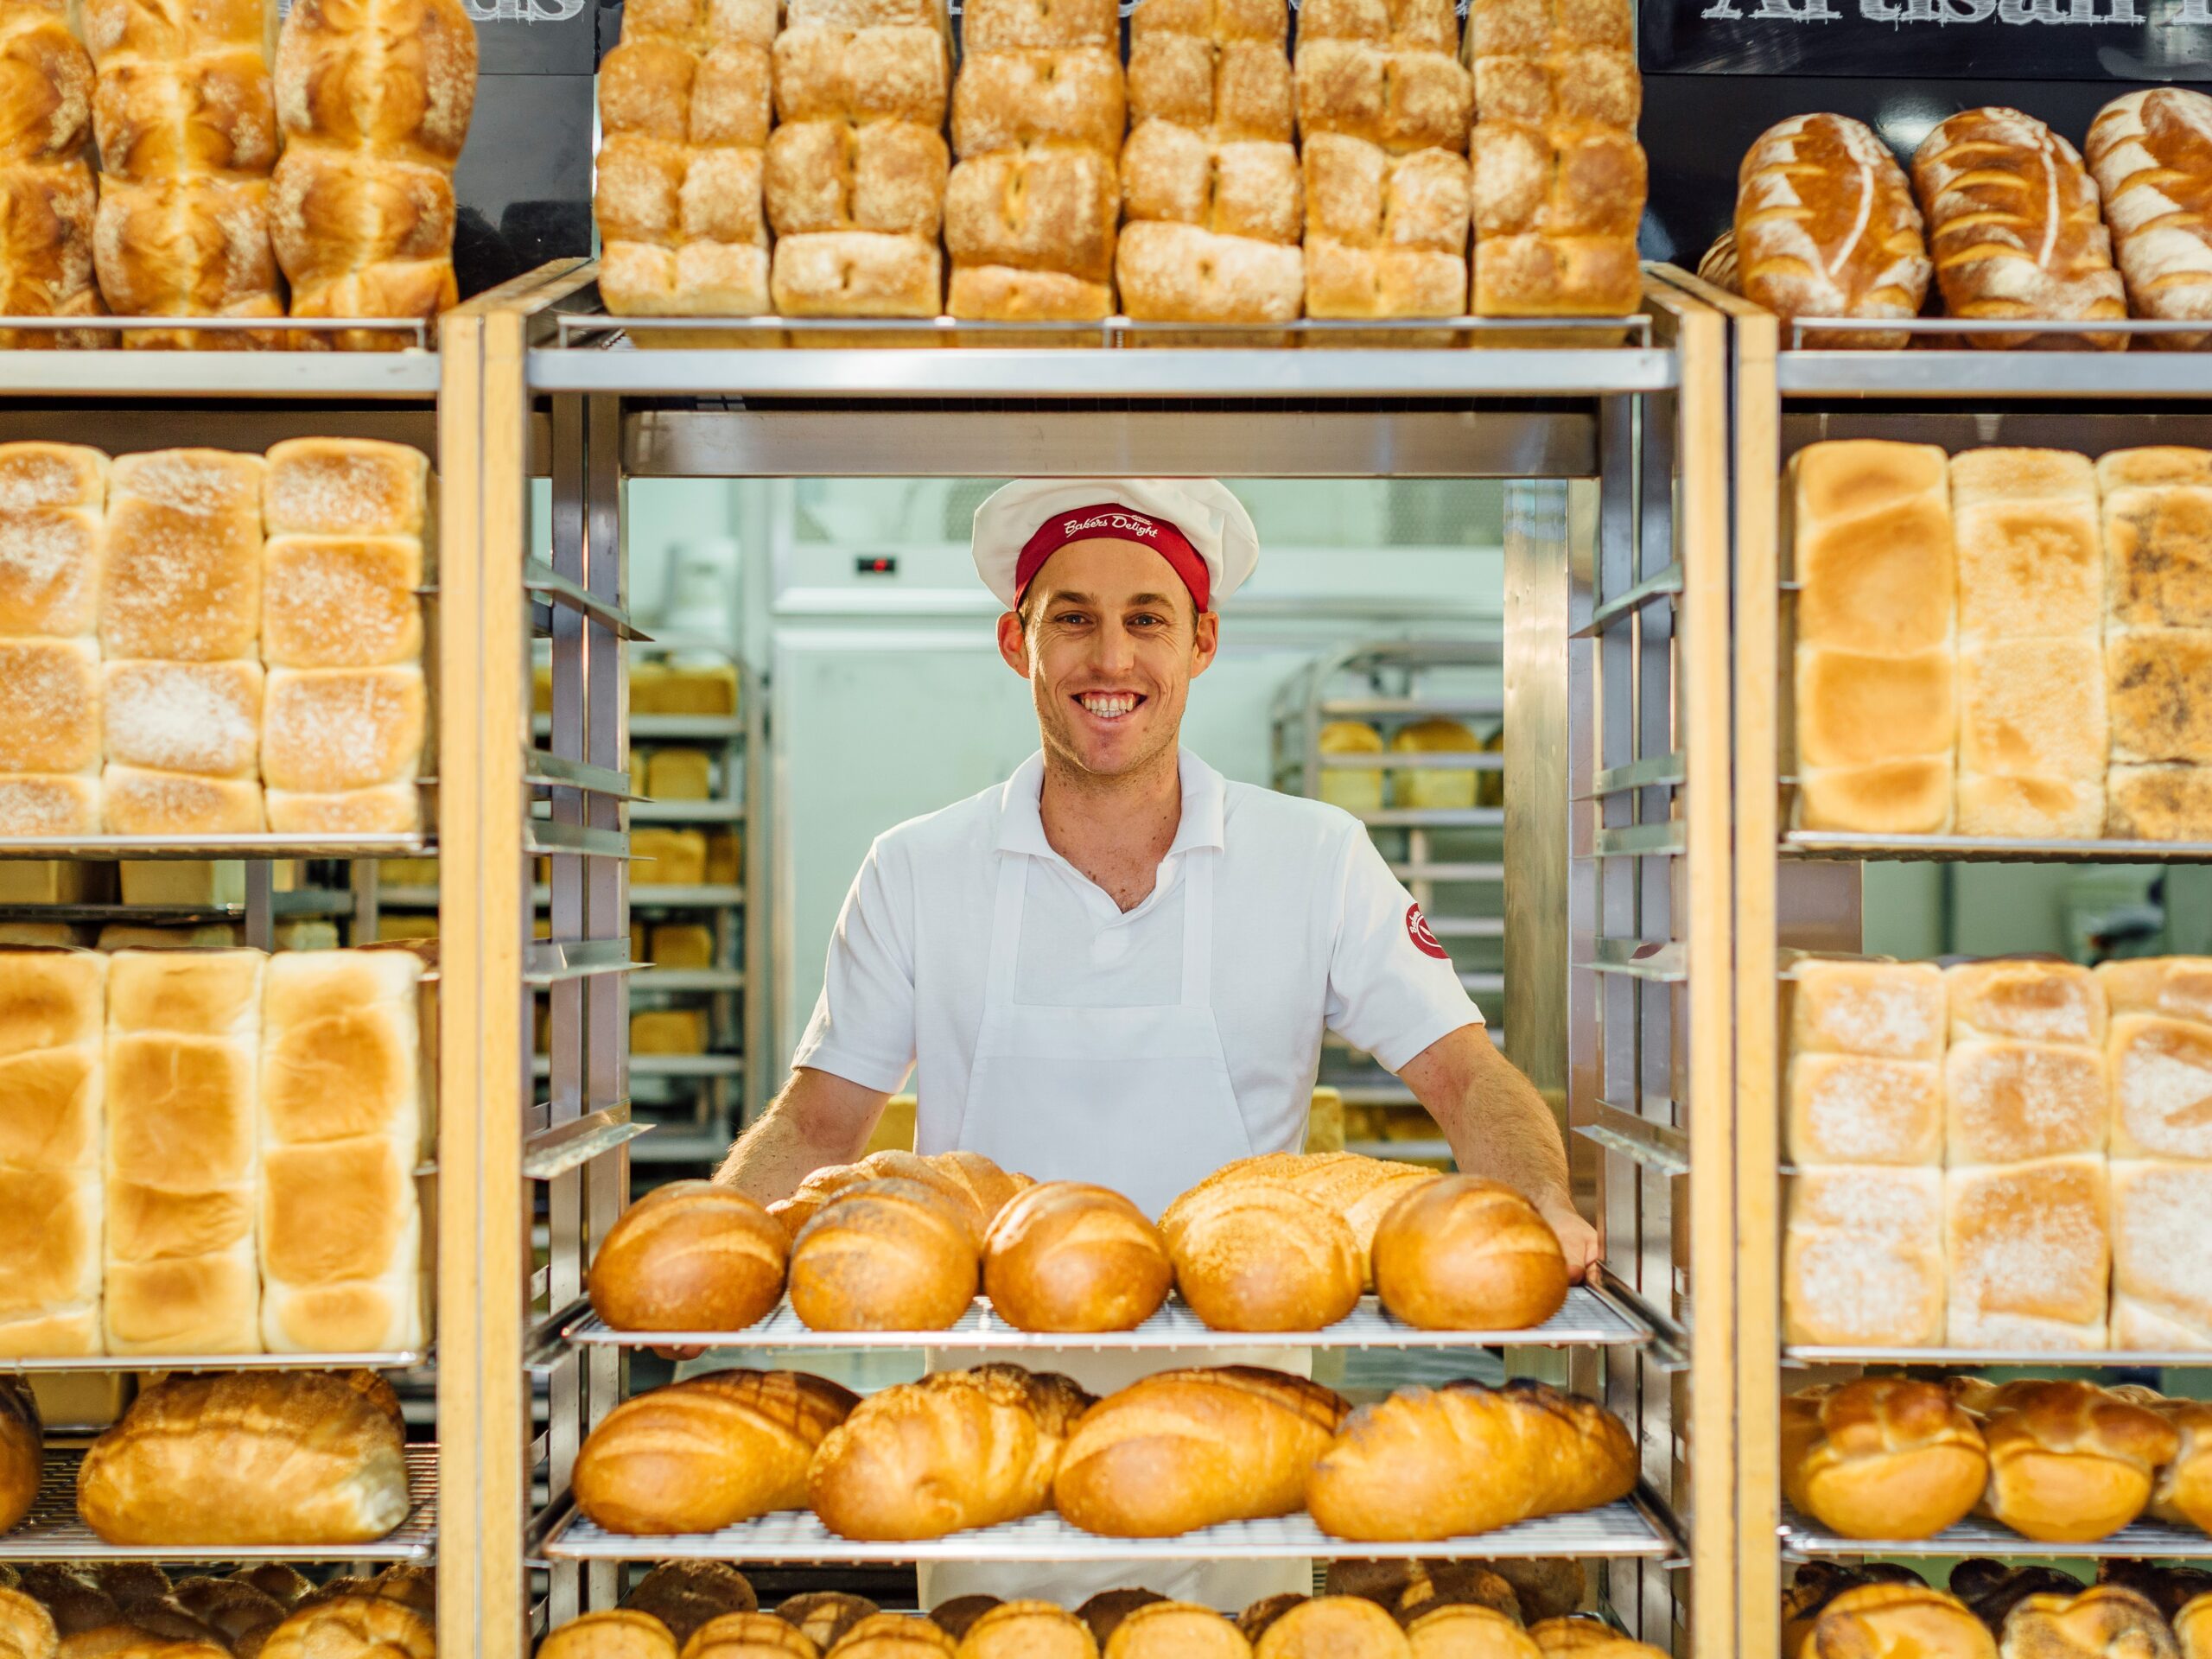 https://franchisebusiness.com.au/wp-content/uploads/2022/02/Bakers-Delight-wall-of-bread-scaled.jpg